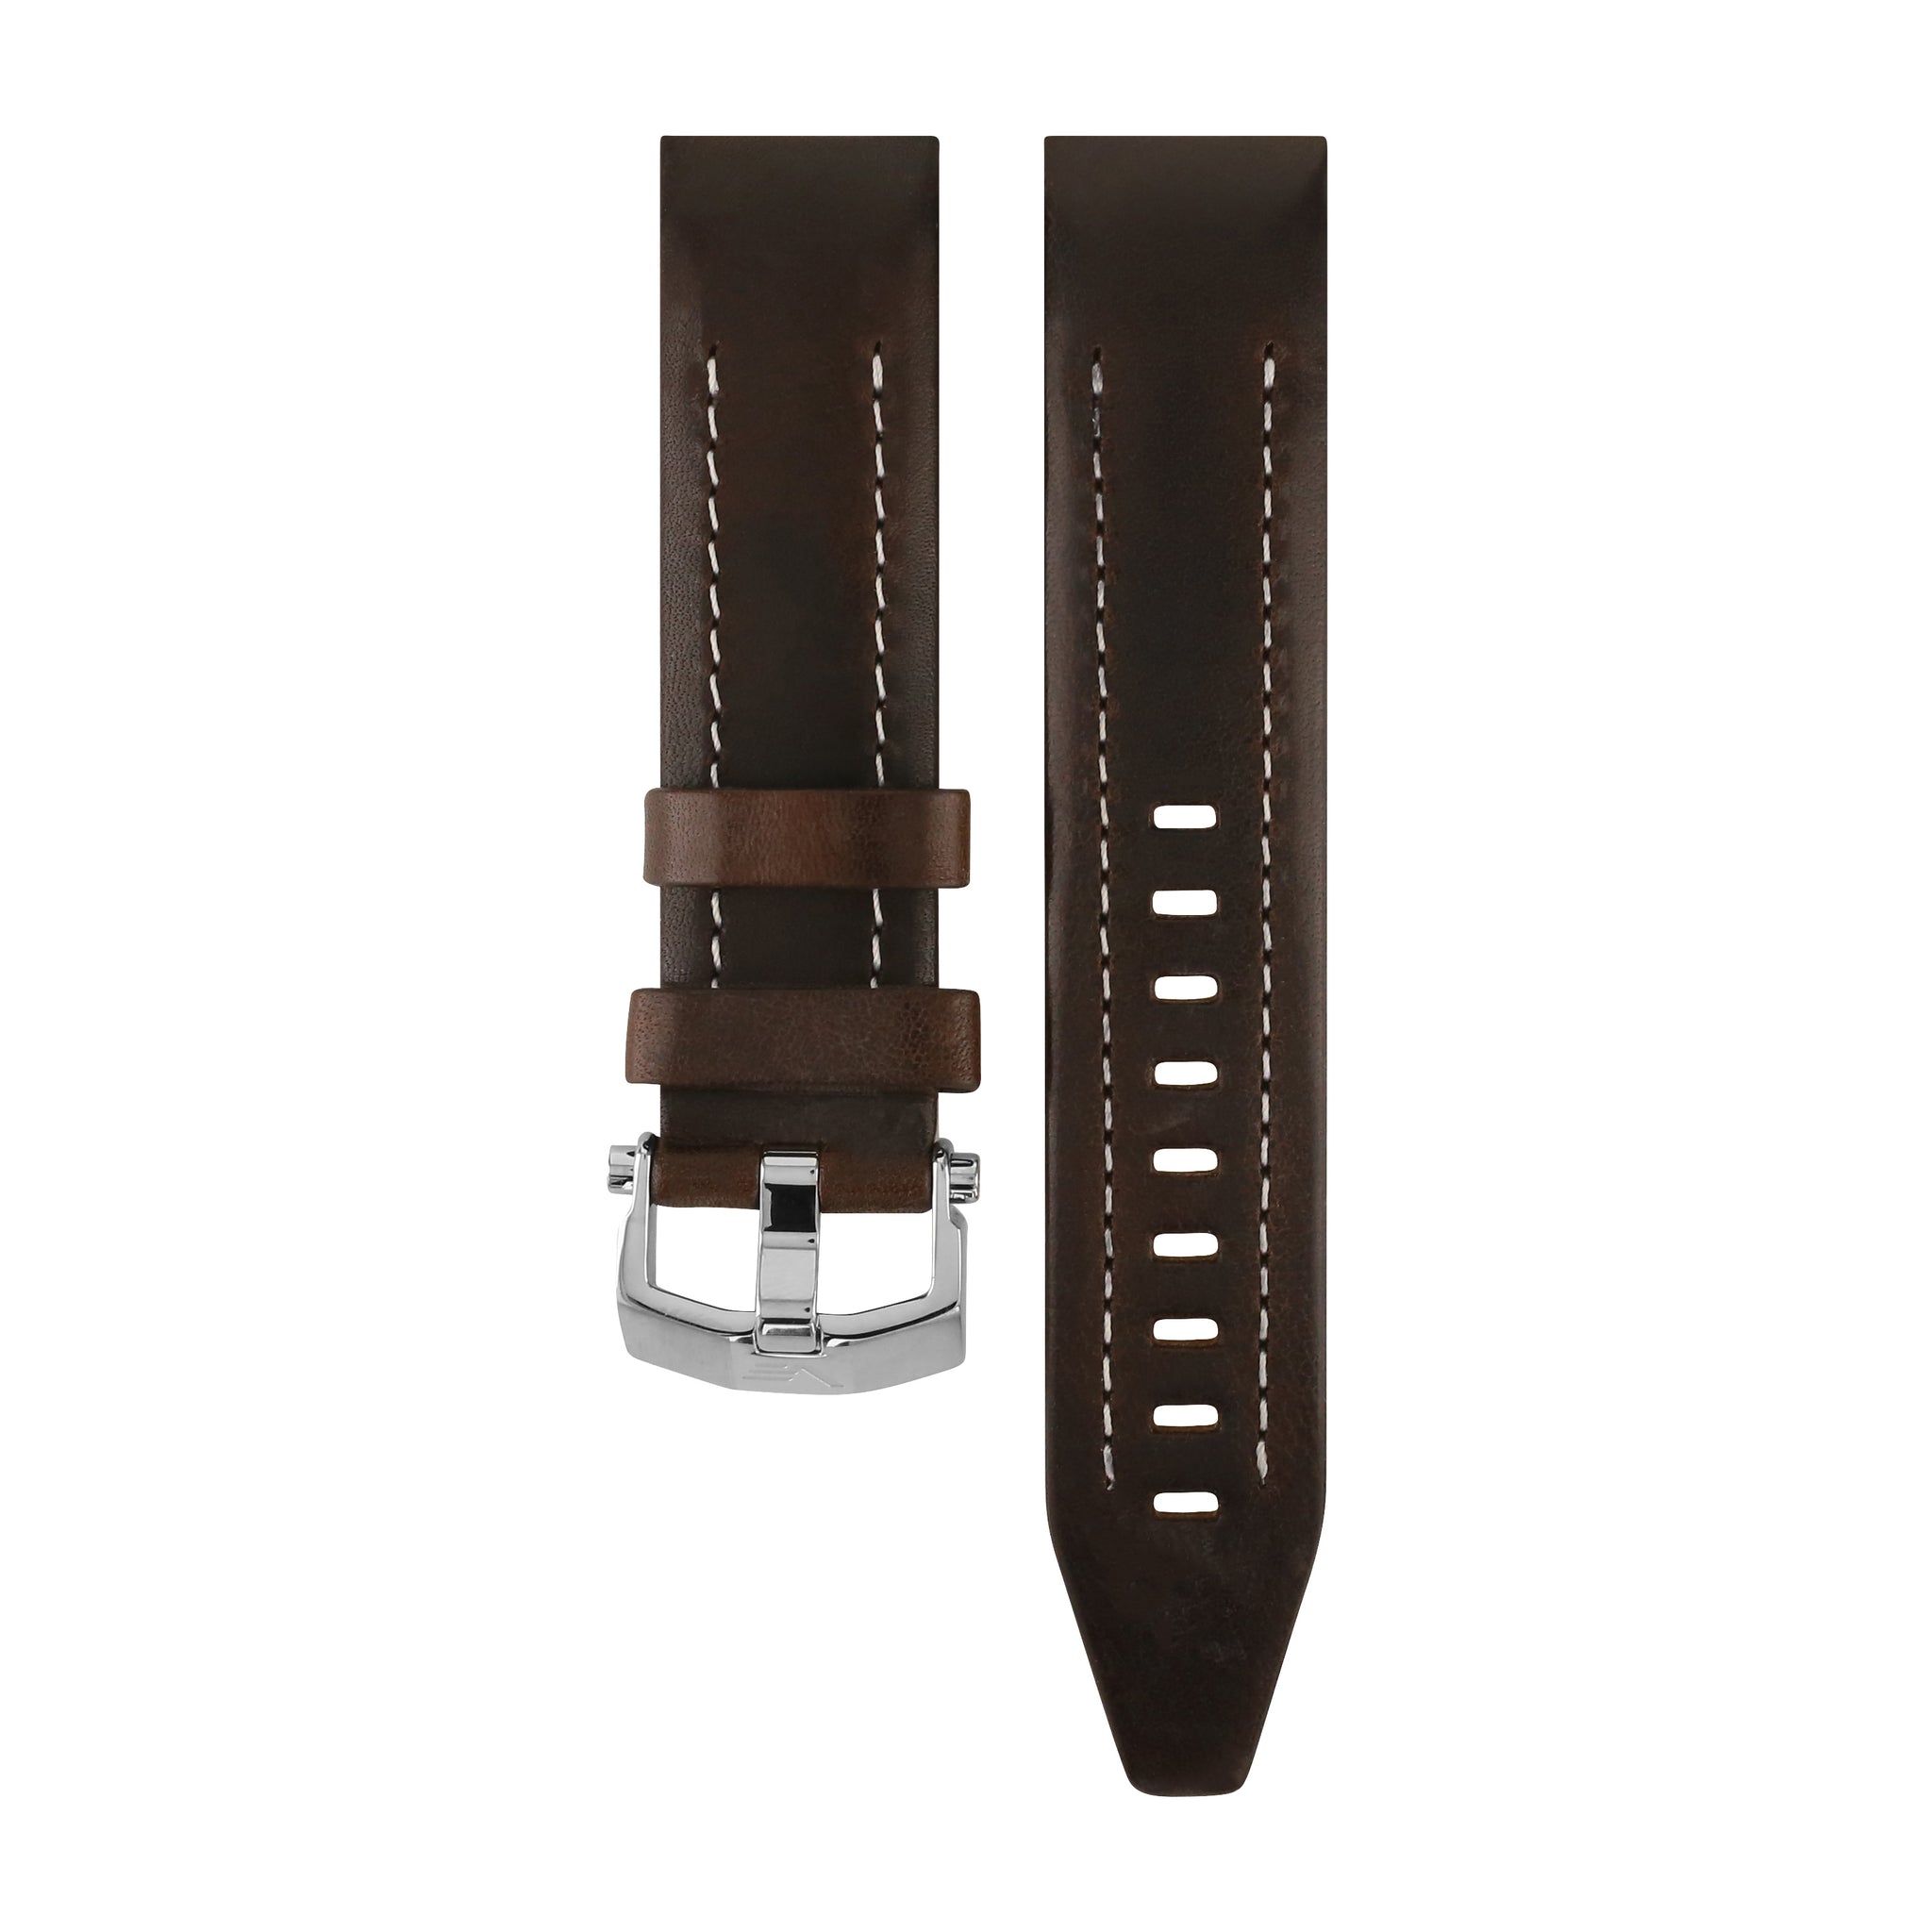 LUNOKHOD 2 BROWN & WHITE LEATHER STRAP 25mm - POLISHED BUCKLE